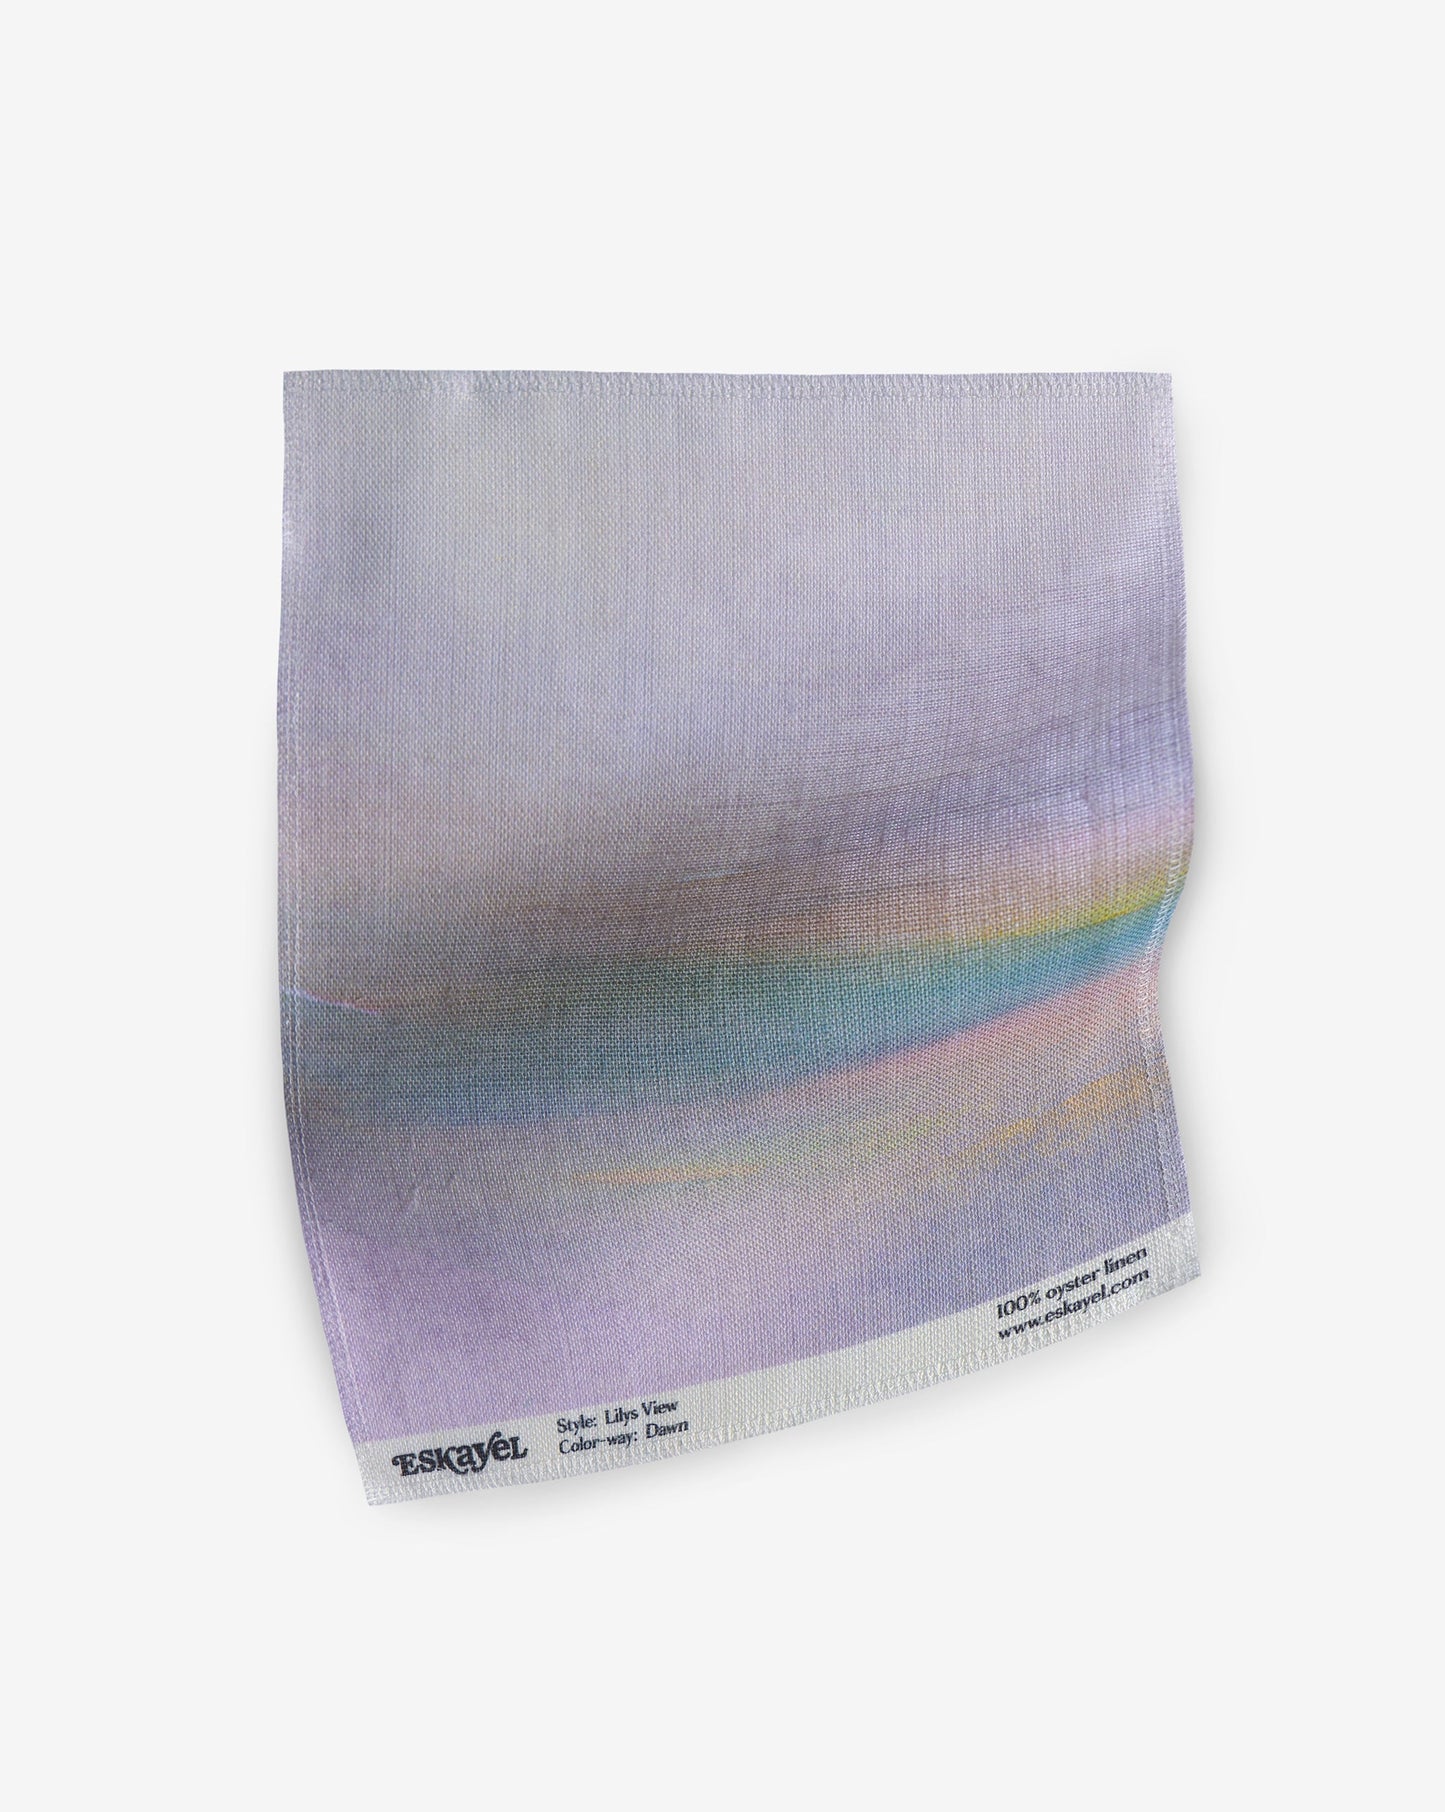 A piece of Lily's View Fabric||Dawn with a rainbow on it.